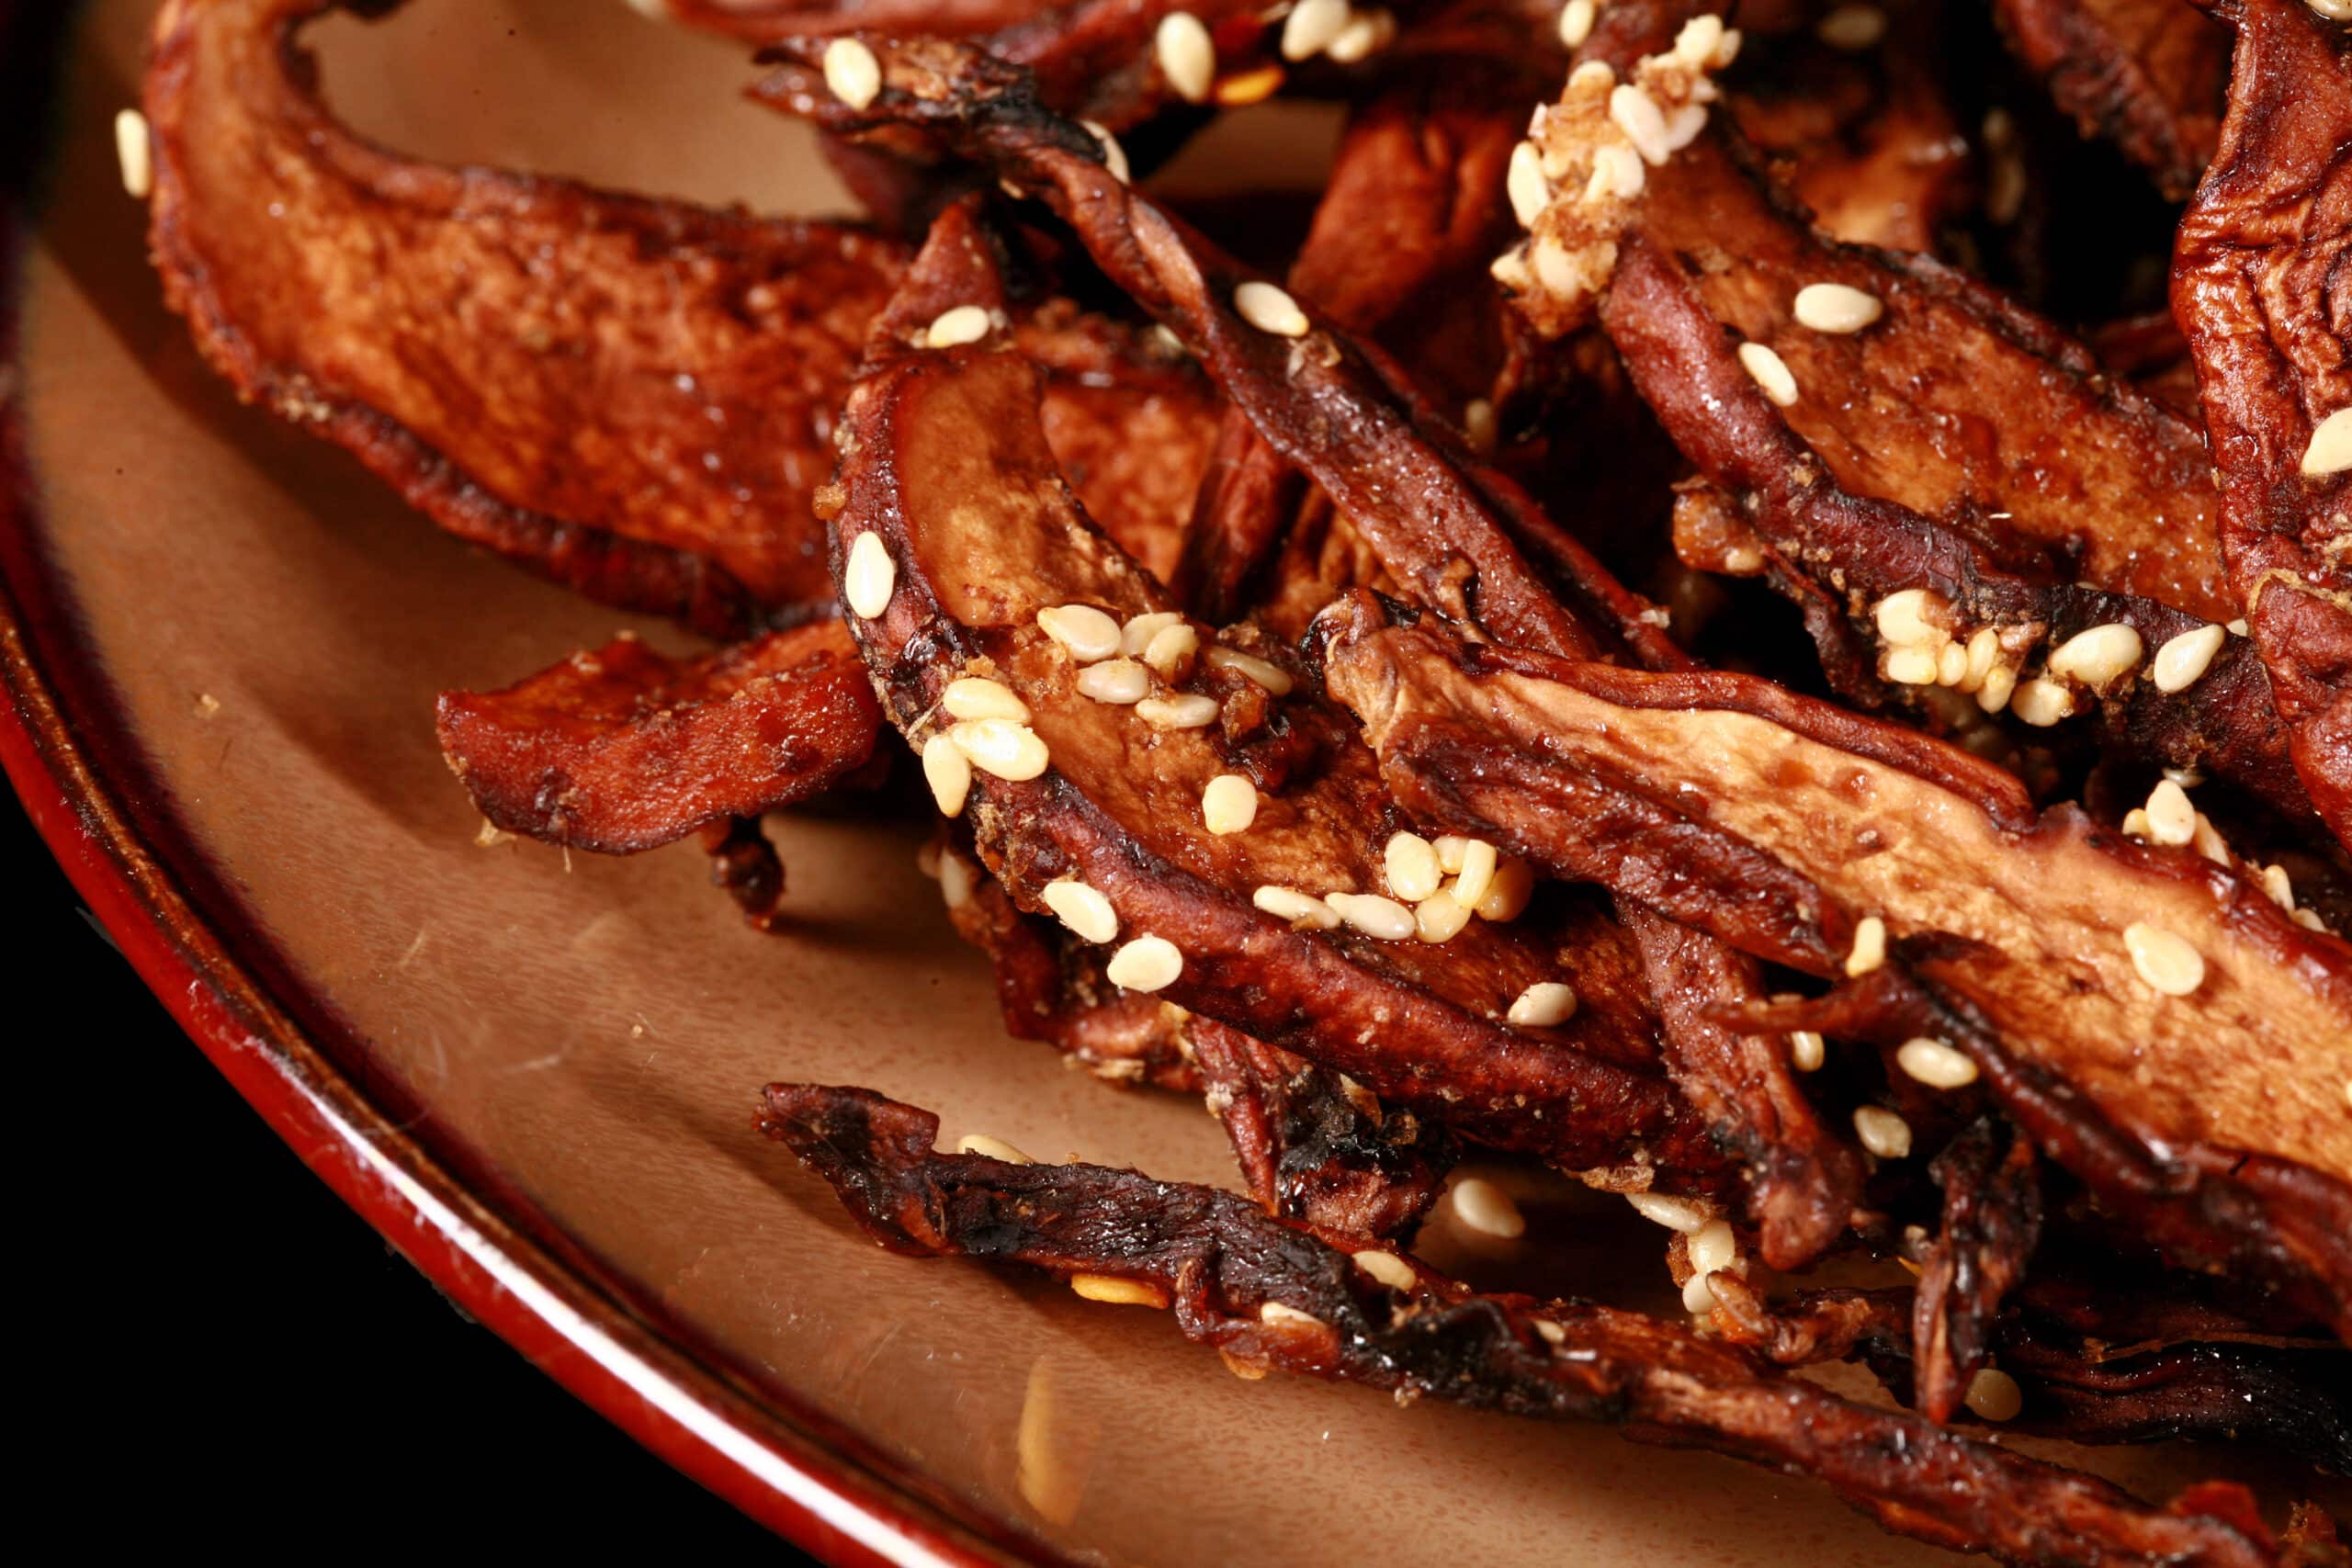 A plate of homemade mushroom jerky made from portabello mushroom slices. This batch has sesame seeds visible.